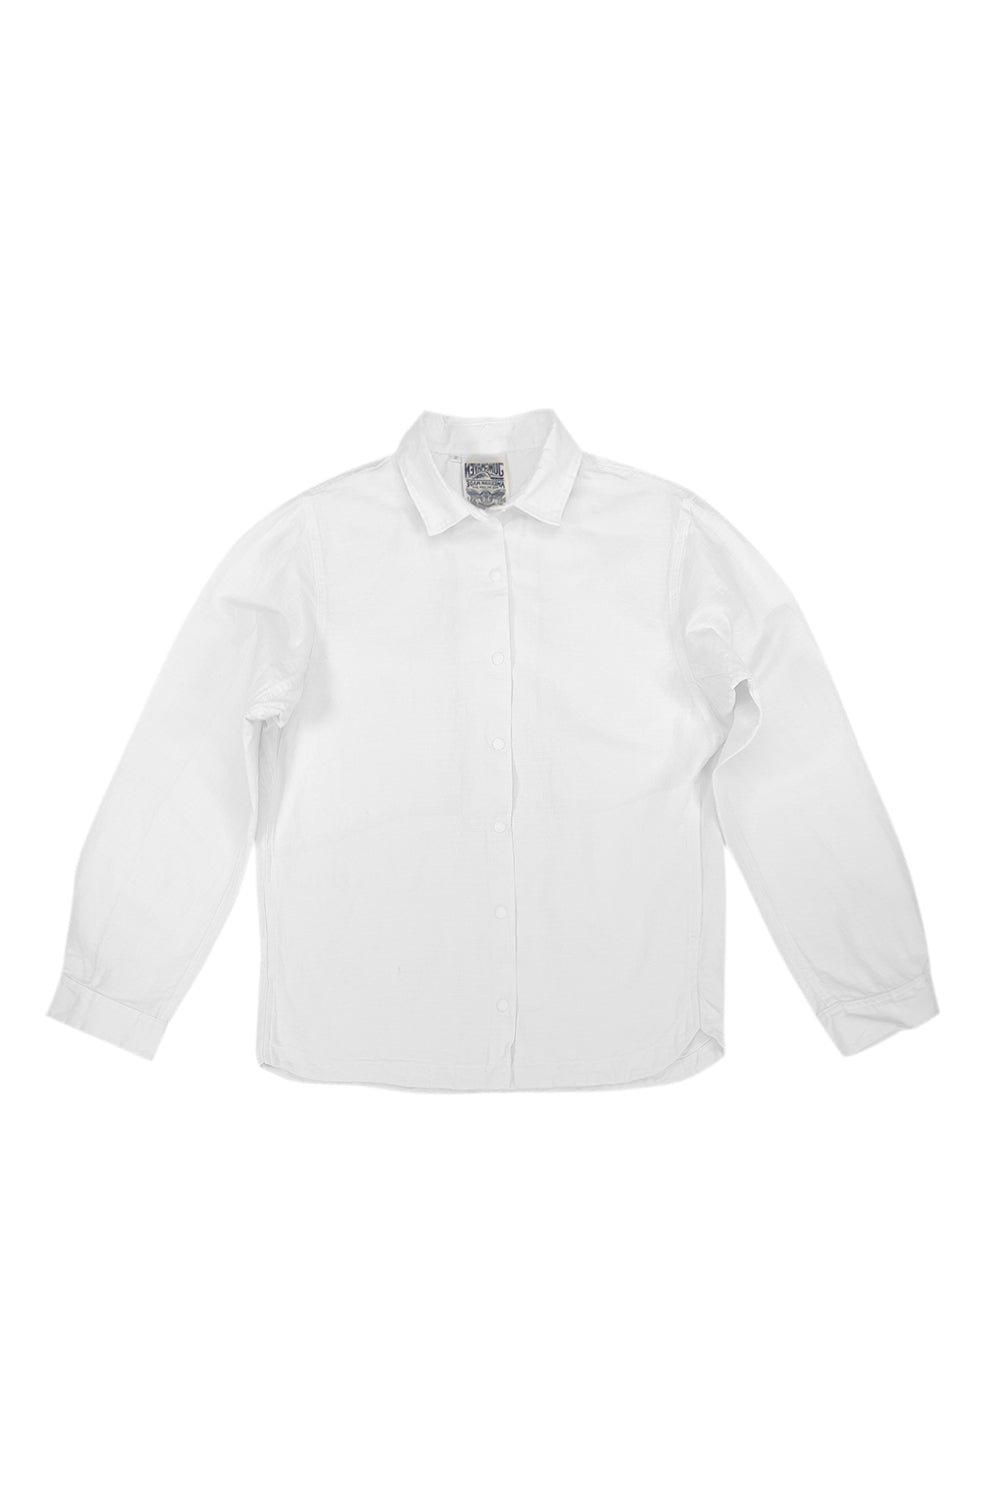 Sandpoint Snap Jacket | Jungmaven Hemp Clothing & Accessories / Color: Washed White